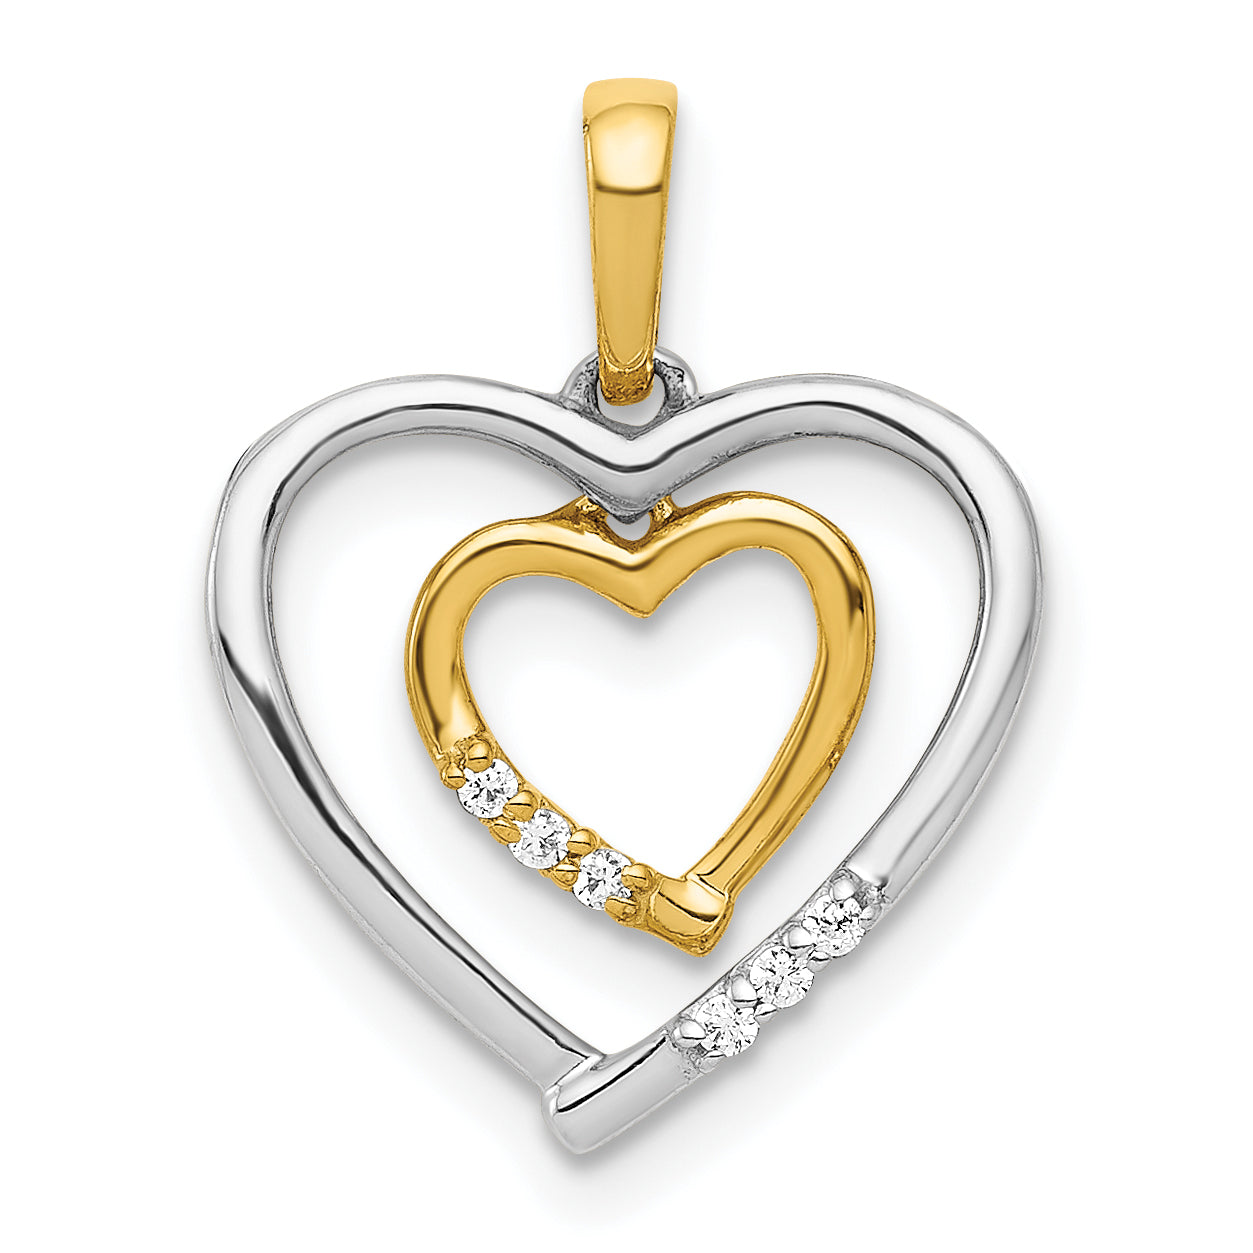 10Kt White with Yellow Gold Heart Charm Diamond Heart Pendant